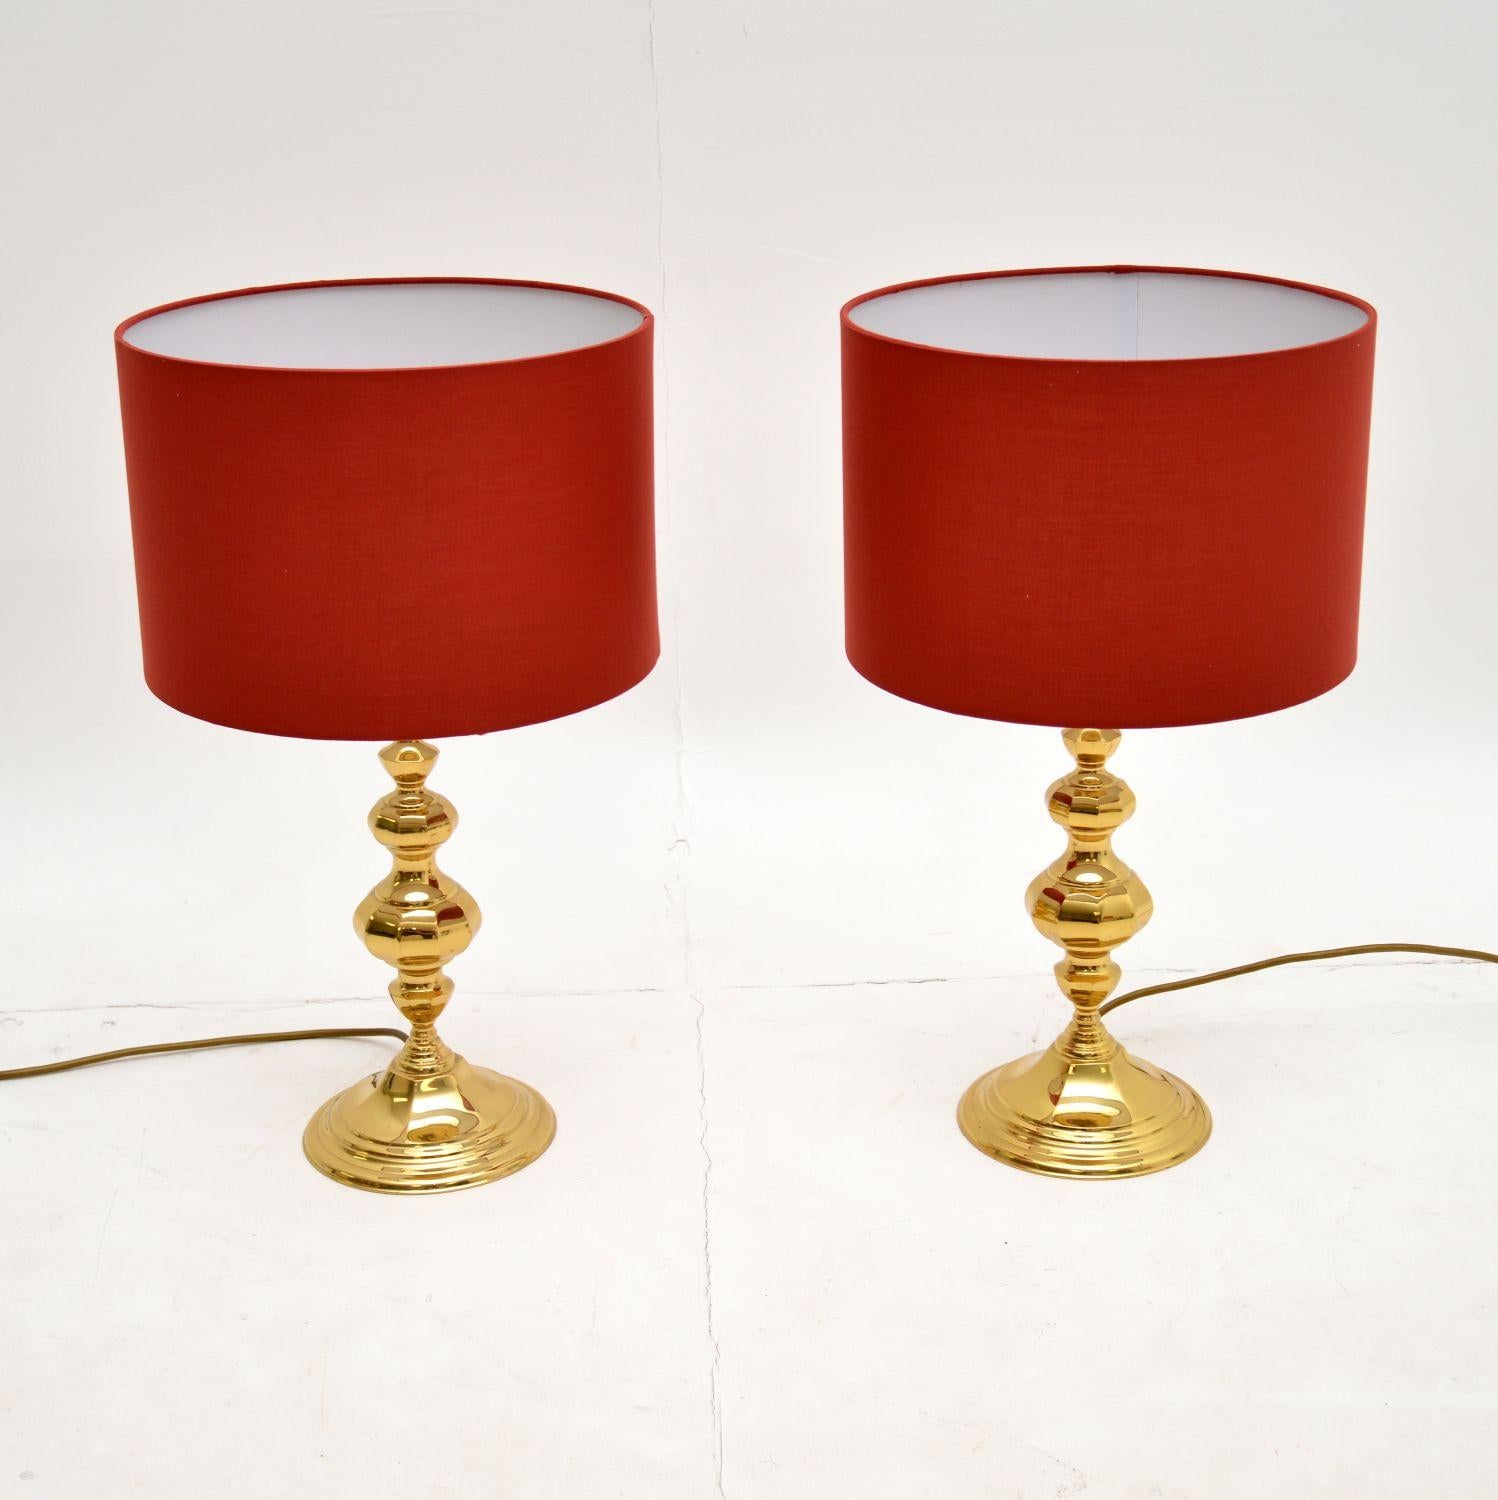 A beautiful pair of vintage solid brass table lamps, made in England and dating from around the 1970’s.

The quality is excellent, these are well made and are a lovely size. The condition is very good for their age, with just some minor surface